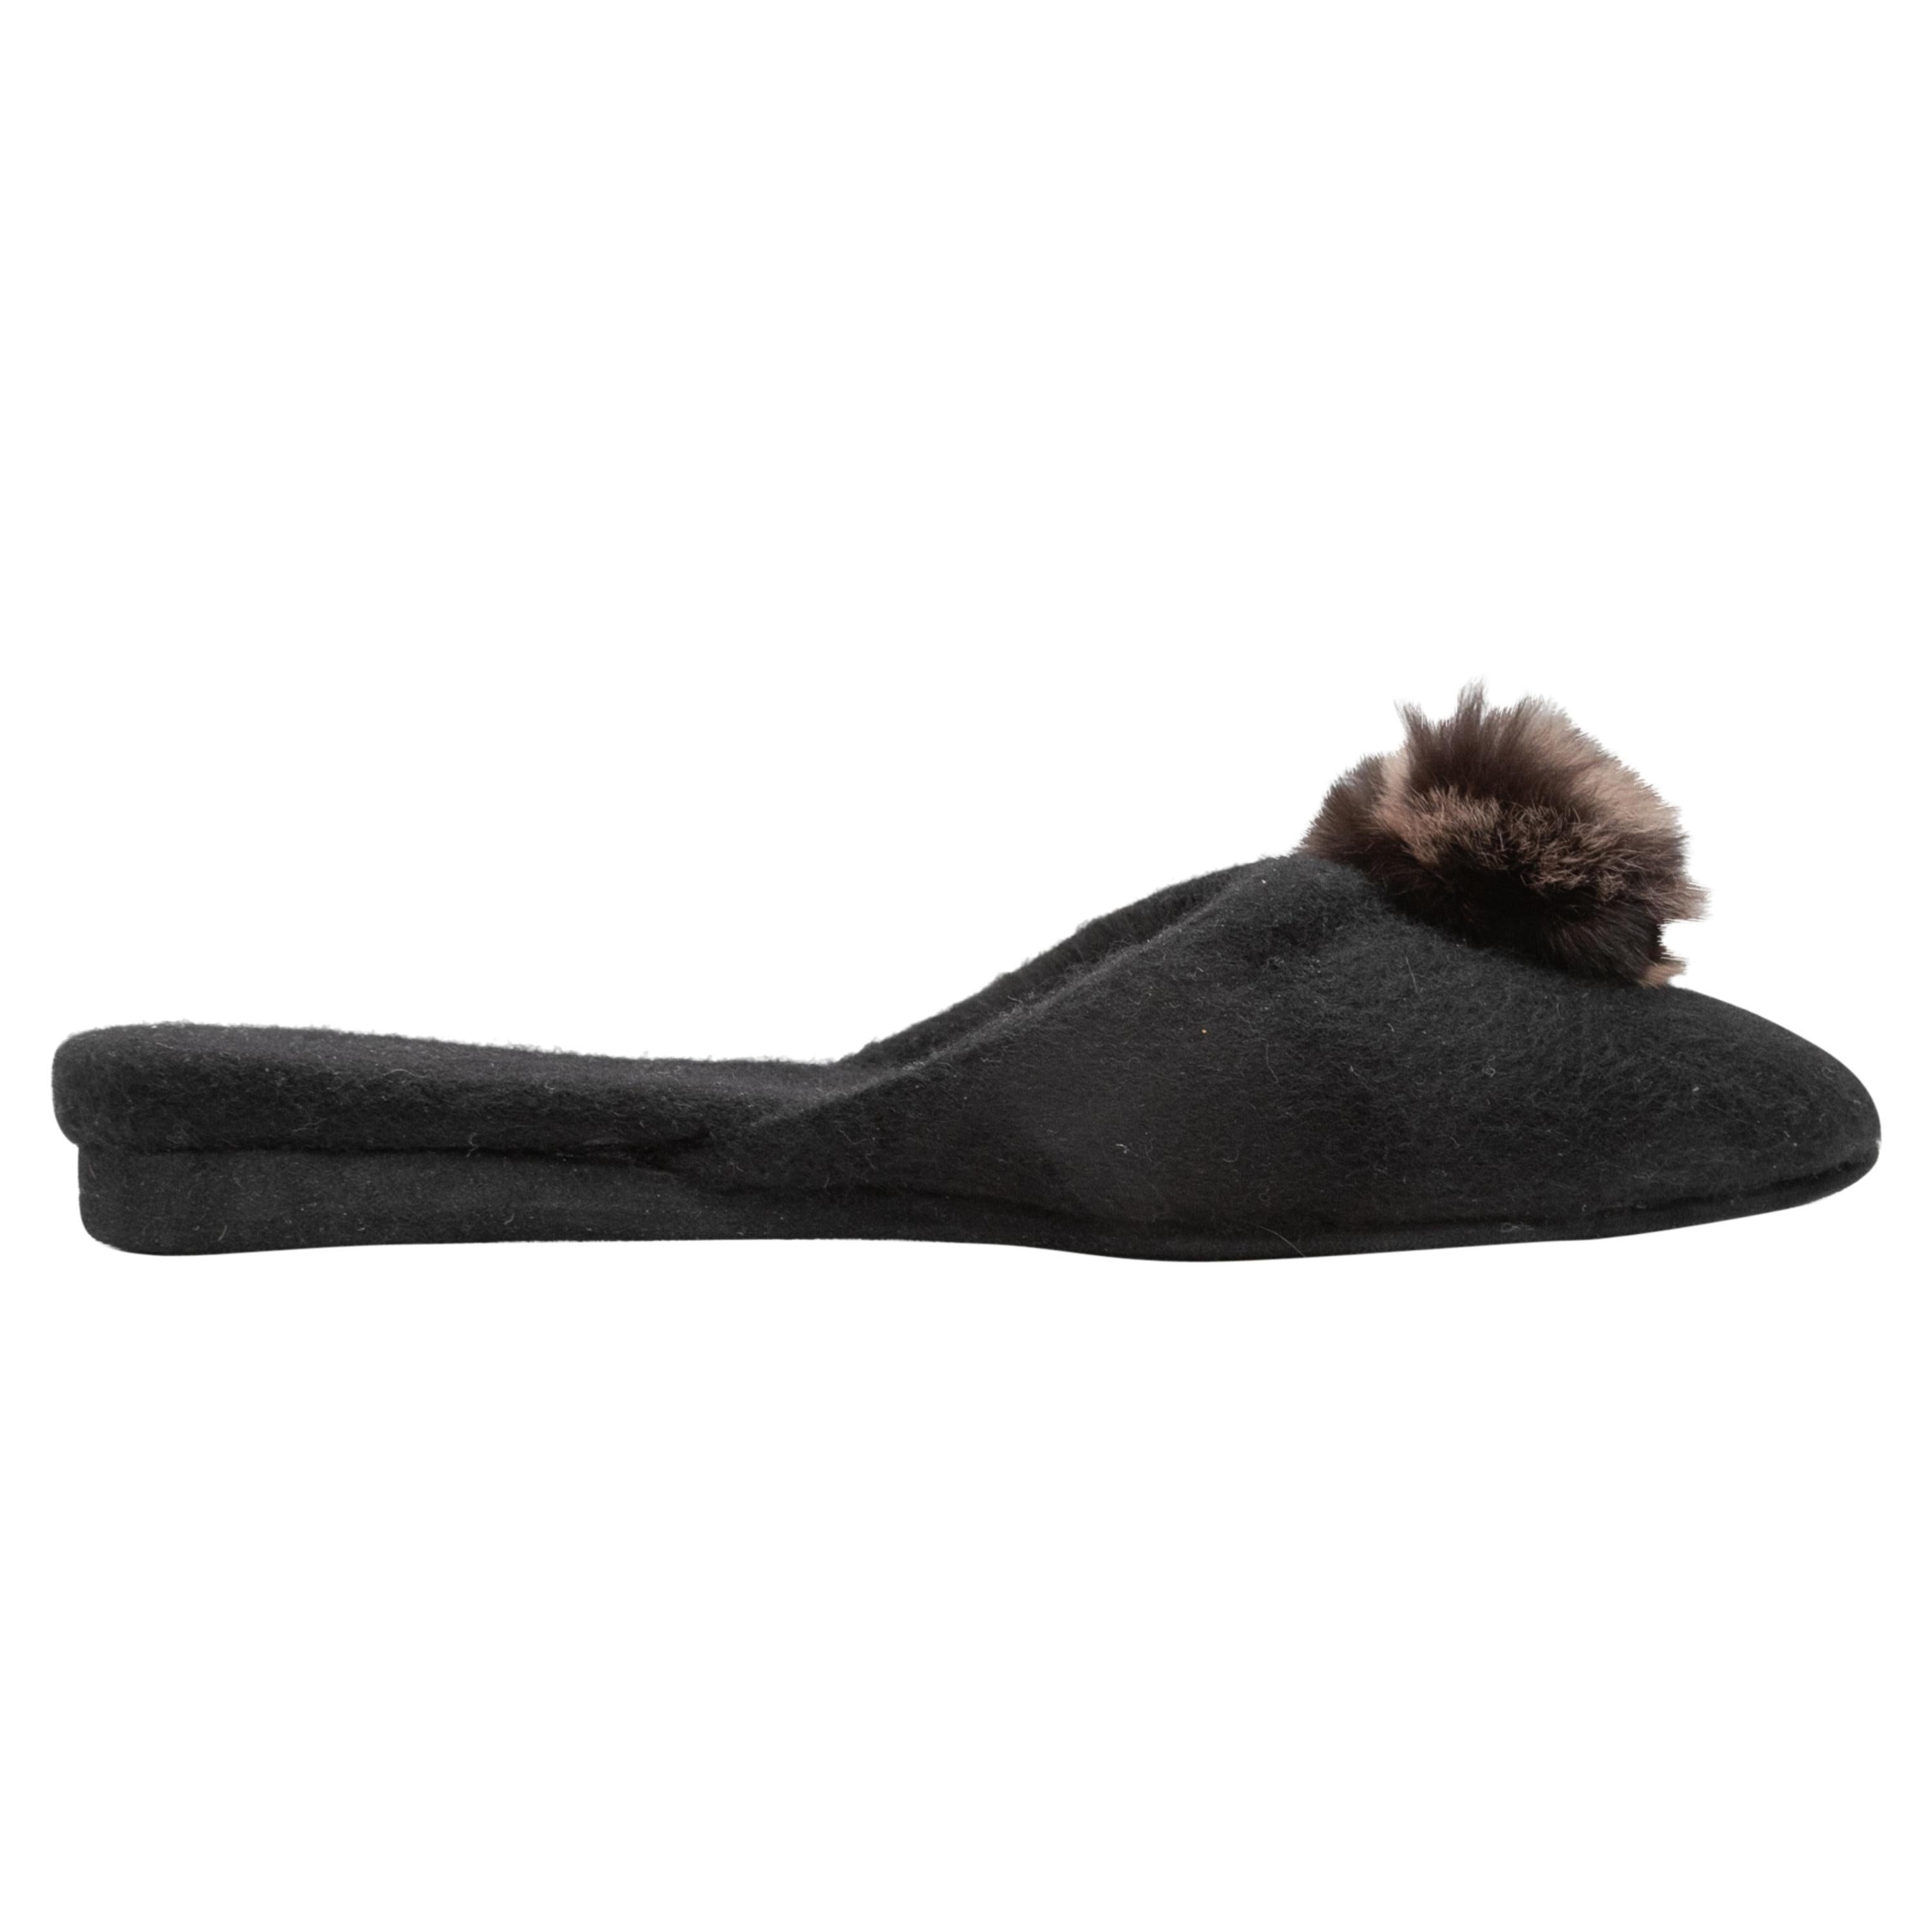 Black & Brown Loro Piana Cashmere & Mink Slippers Size 38 For Sale